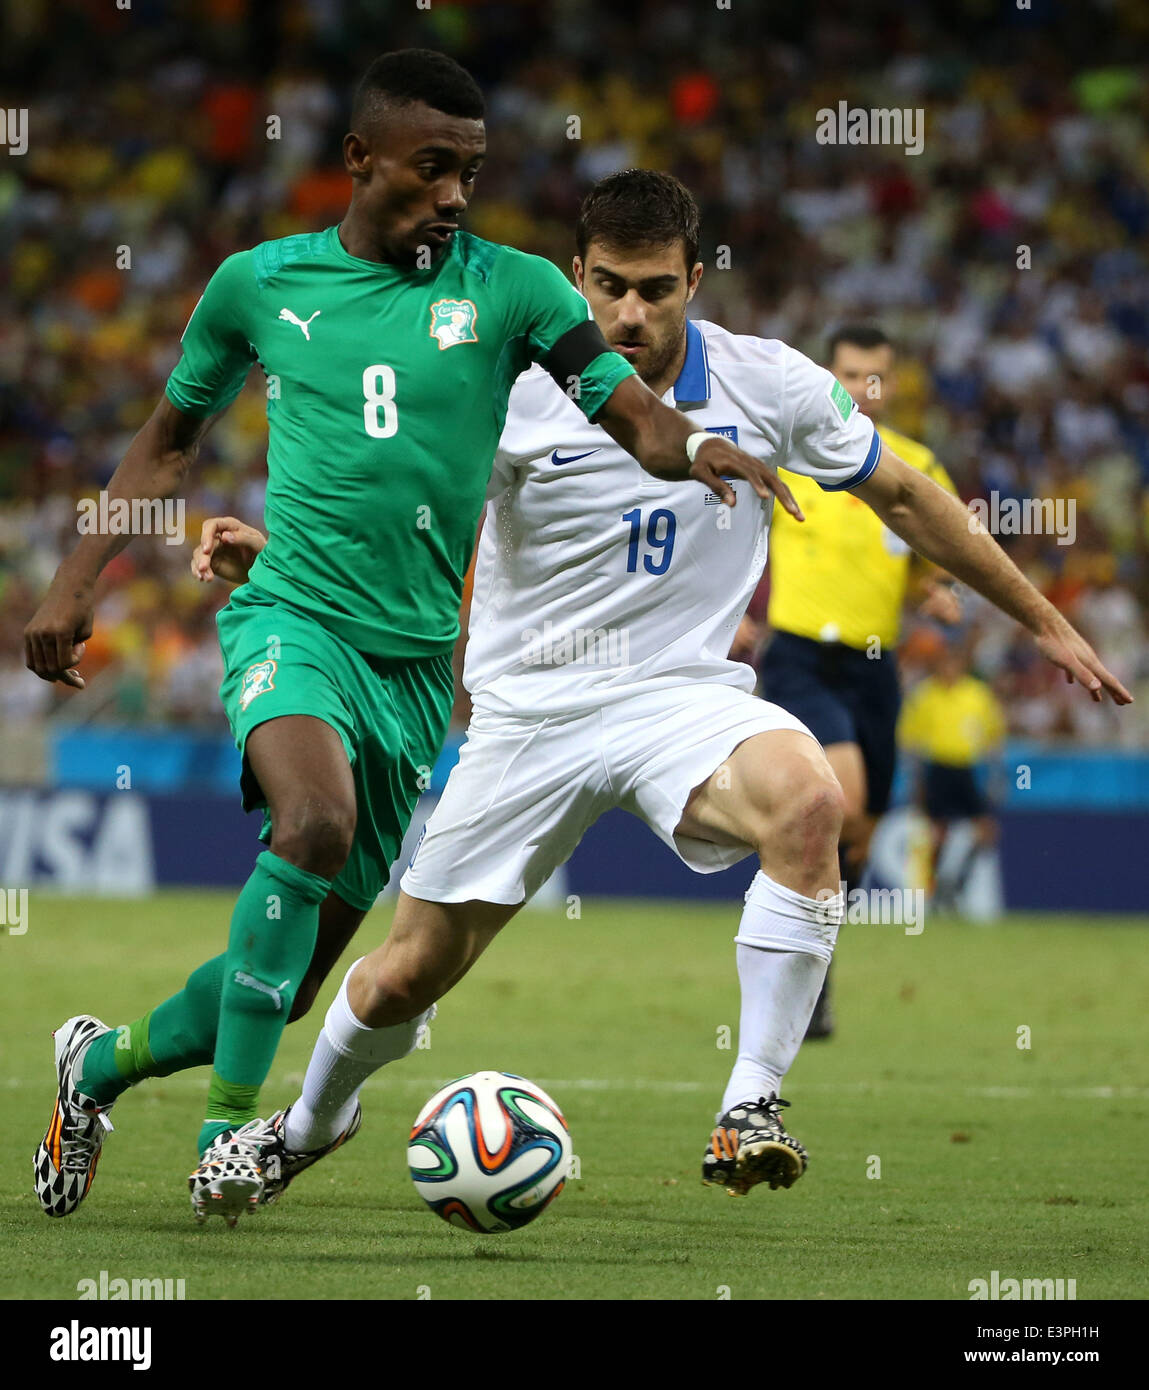 (140624) -- FORTALEZA, June 24, 2014 (Xinhua) -- Greece's Sokratis Papastathopoulos (R) vies with Cote d'Ivoire's Salomon Kalou during a Group C match between Greece and Cote d'Ivoire of 2014 FIFA World Cup at the Estadio Castelao Stadium in Fortaleza, Brazil, June 24, 2014. Greece won 2-1 over Cote d'Ivoire on Tuesday. (Xinhua/Cao Can)(xzj) Stock Photo